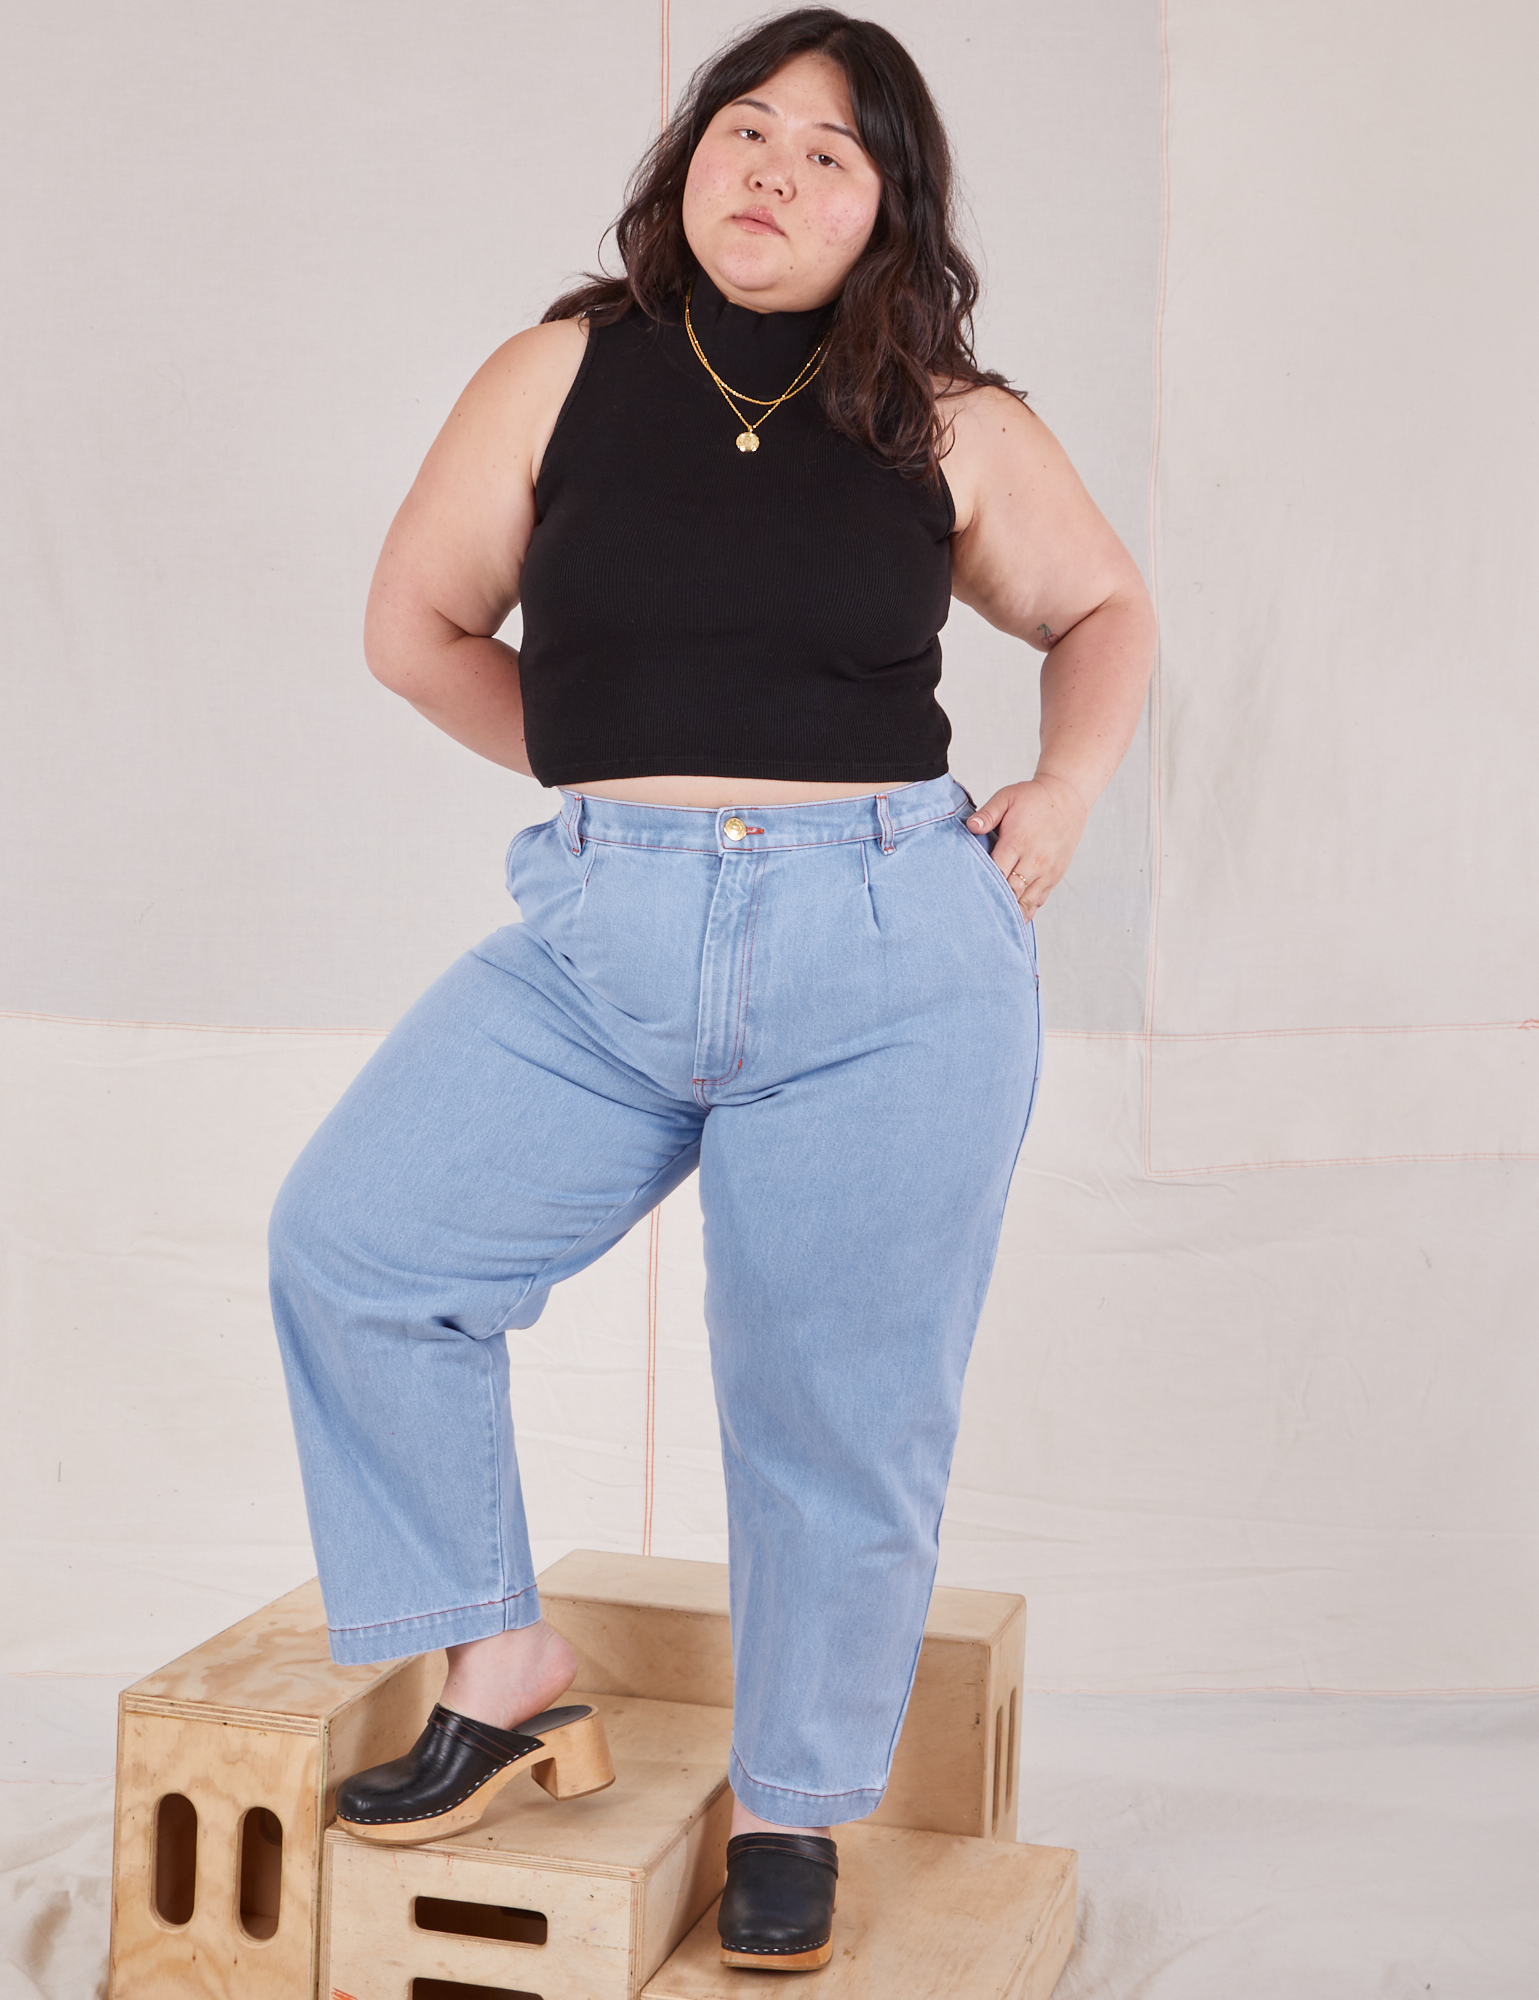 Ashley is wearing Sleeveless Essential Turtleneck in Basic Black and light wash denim Trouser Jeans